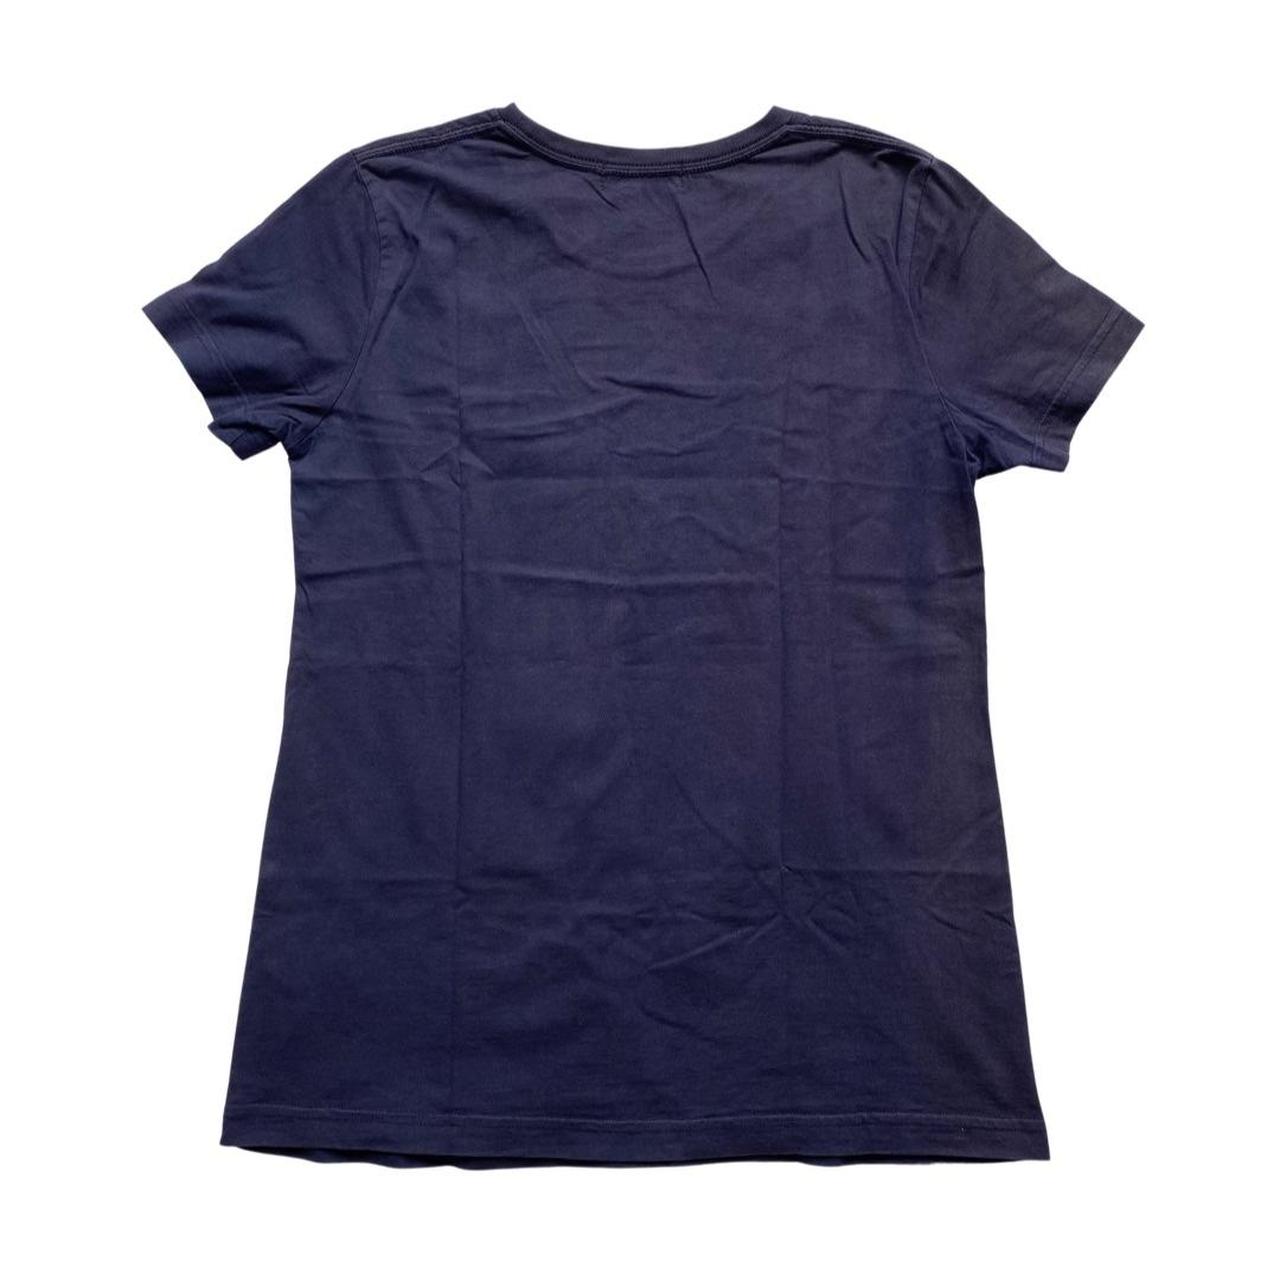 Product Image 2 - Vintage Undercover purple tee with